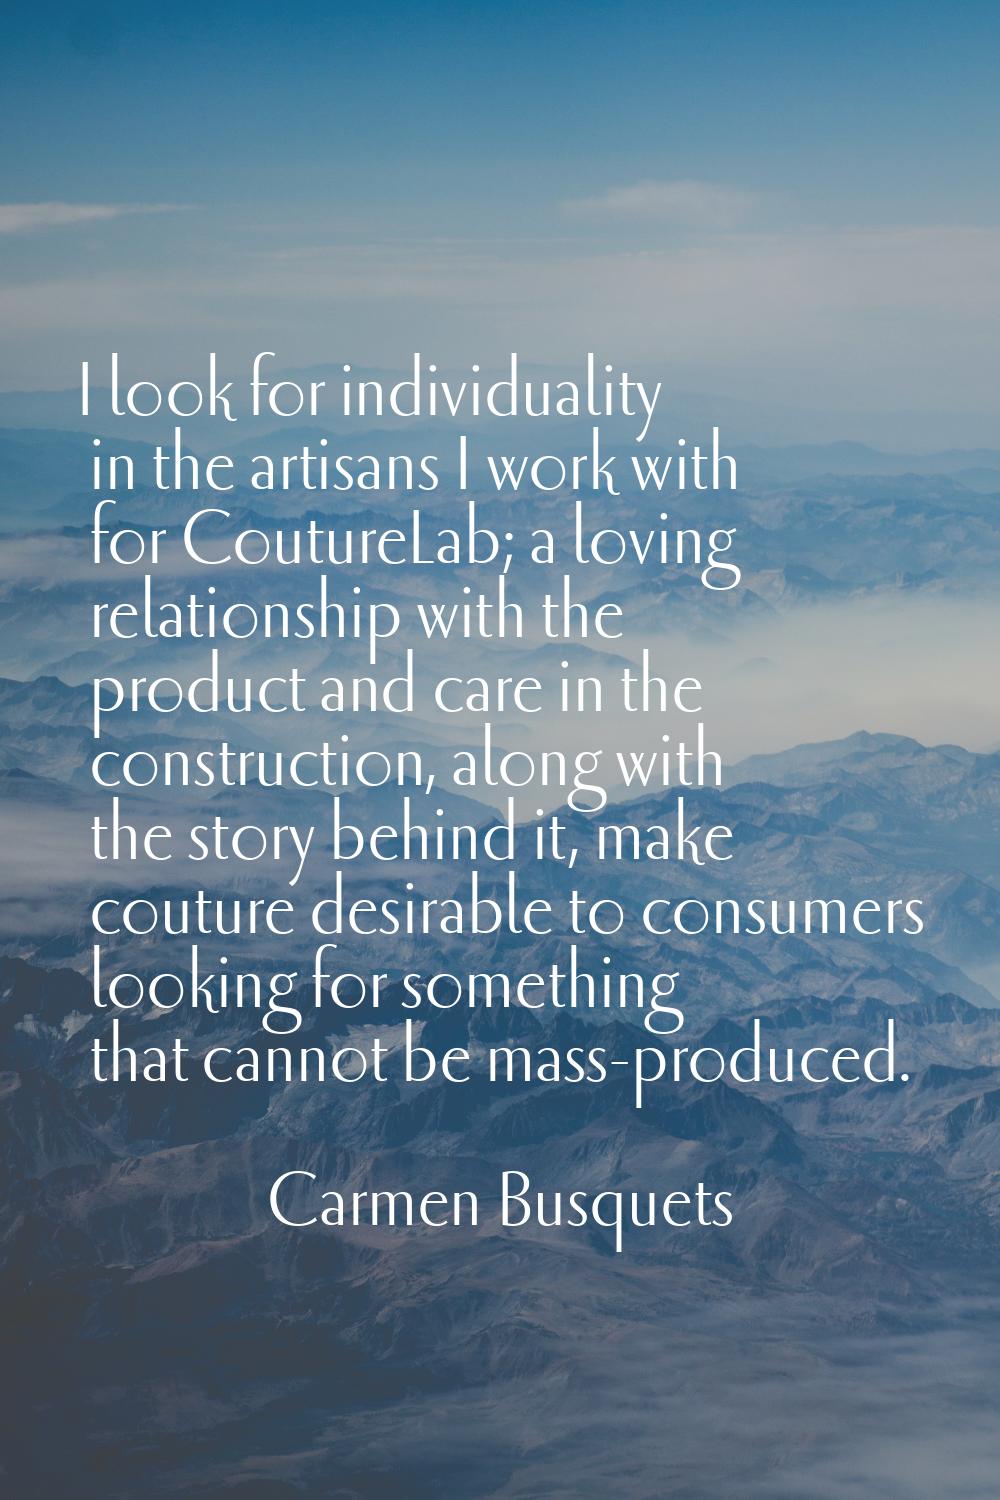 I look for individuality in the artisans I work with for CoutureLab; a loving relationship with the